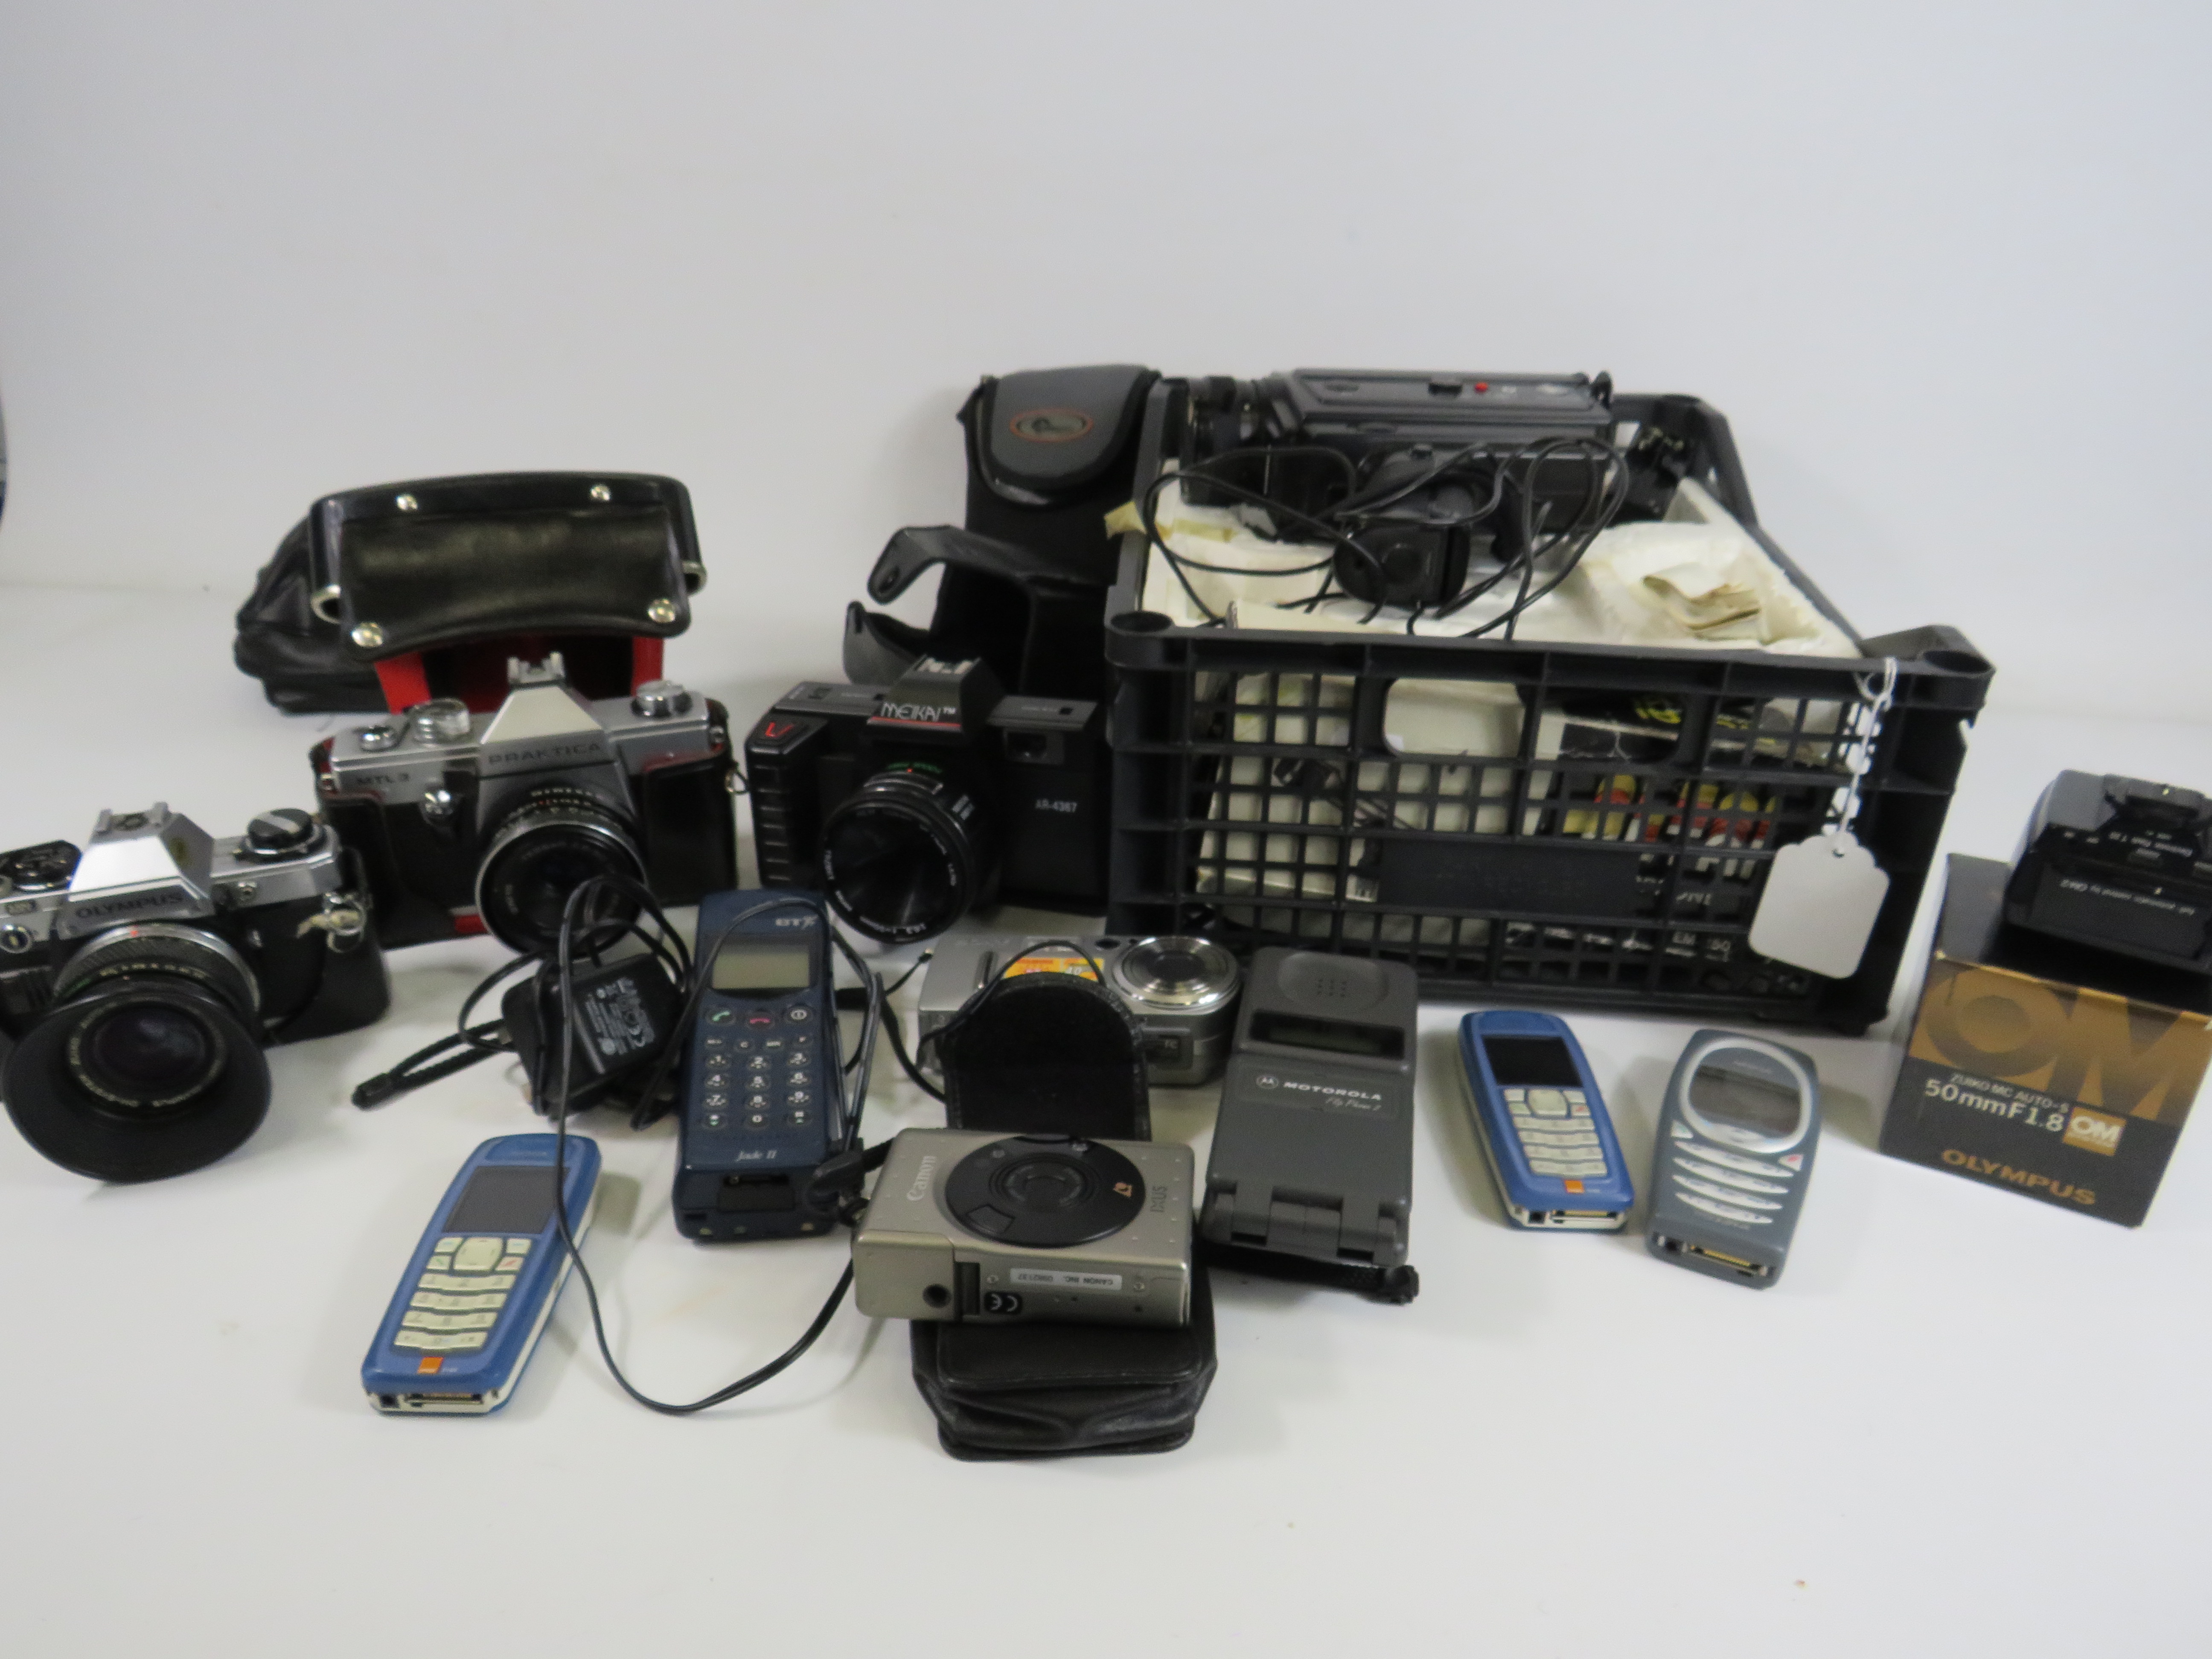 Large selection of vintage Cameras and mobile phones, including Practika, Olympus etc.